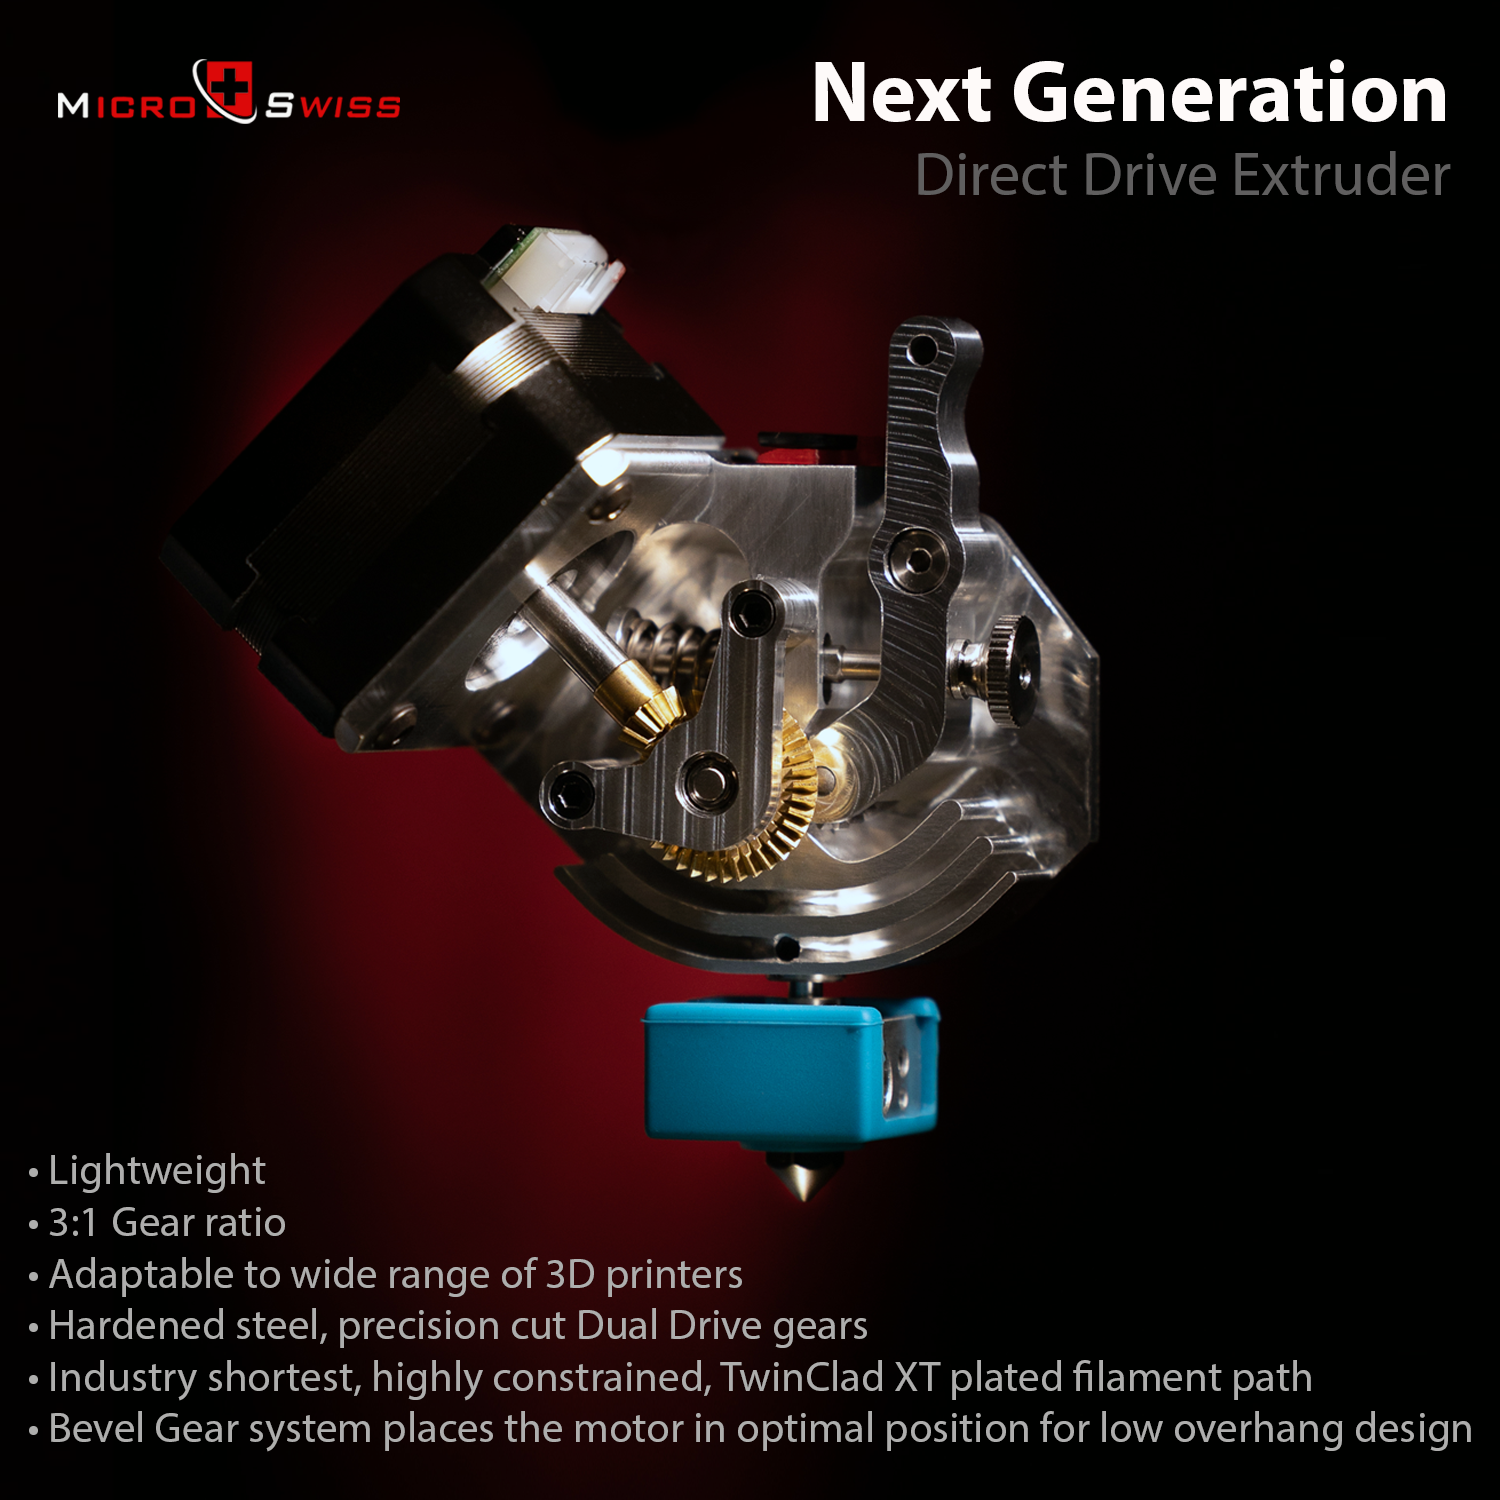 Micro Swiss Next Generation Direct Drive Extruder coming soon